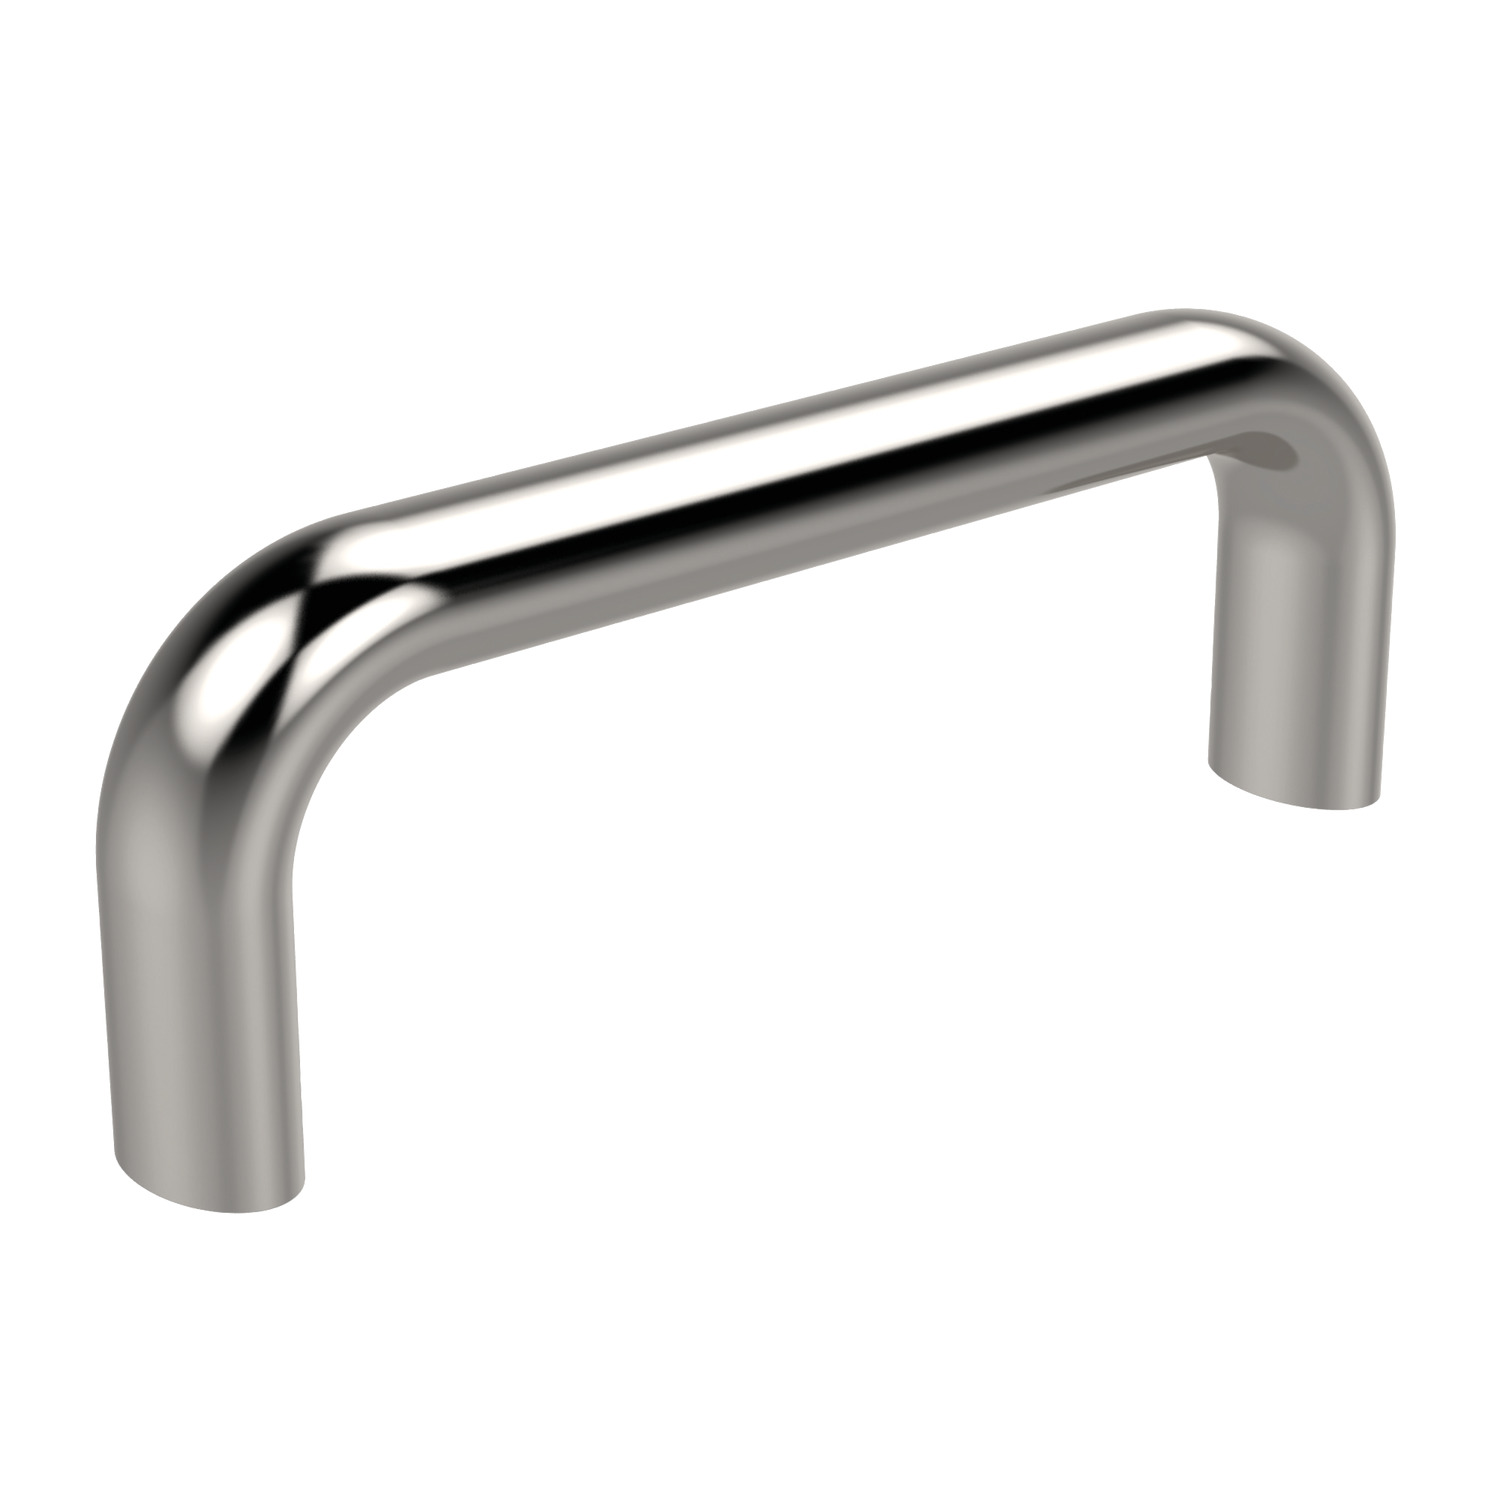 Product 78910, Pull Handles - Oval Type stainless steel / 